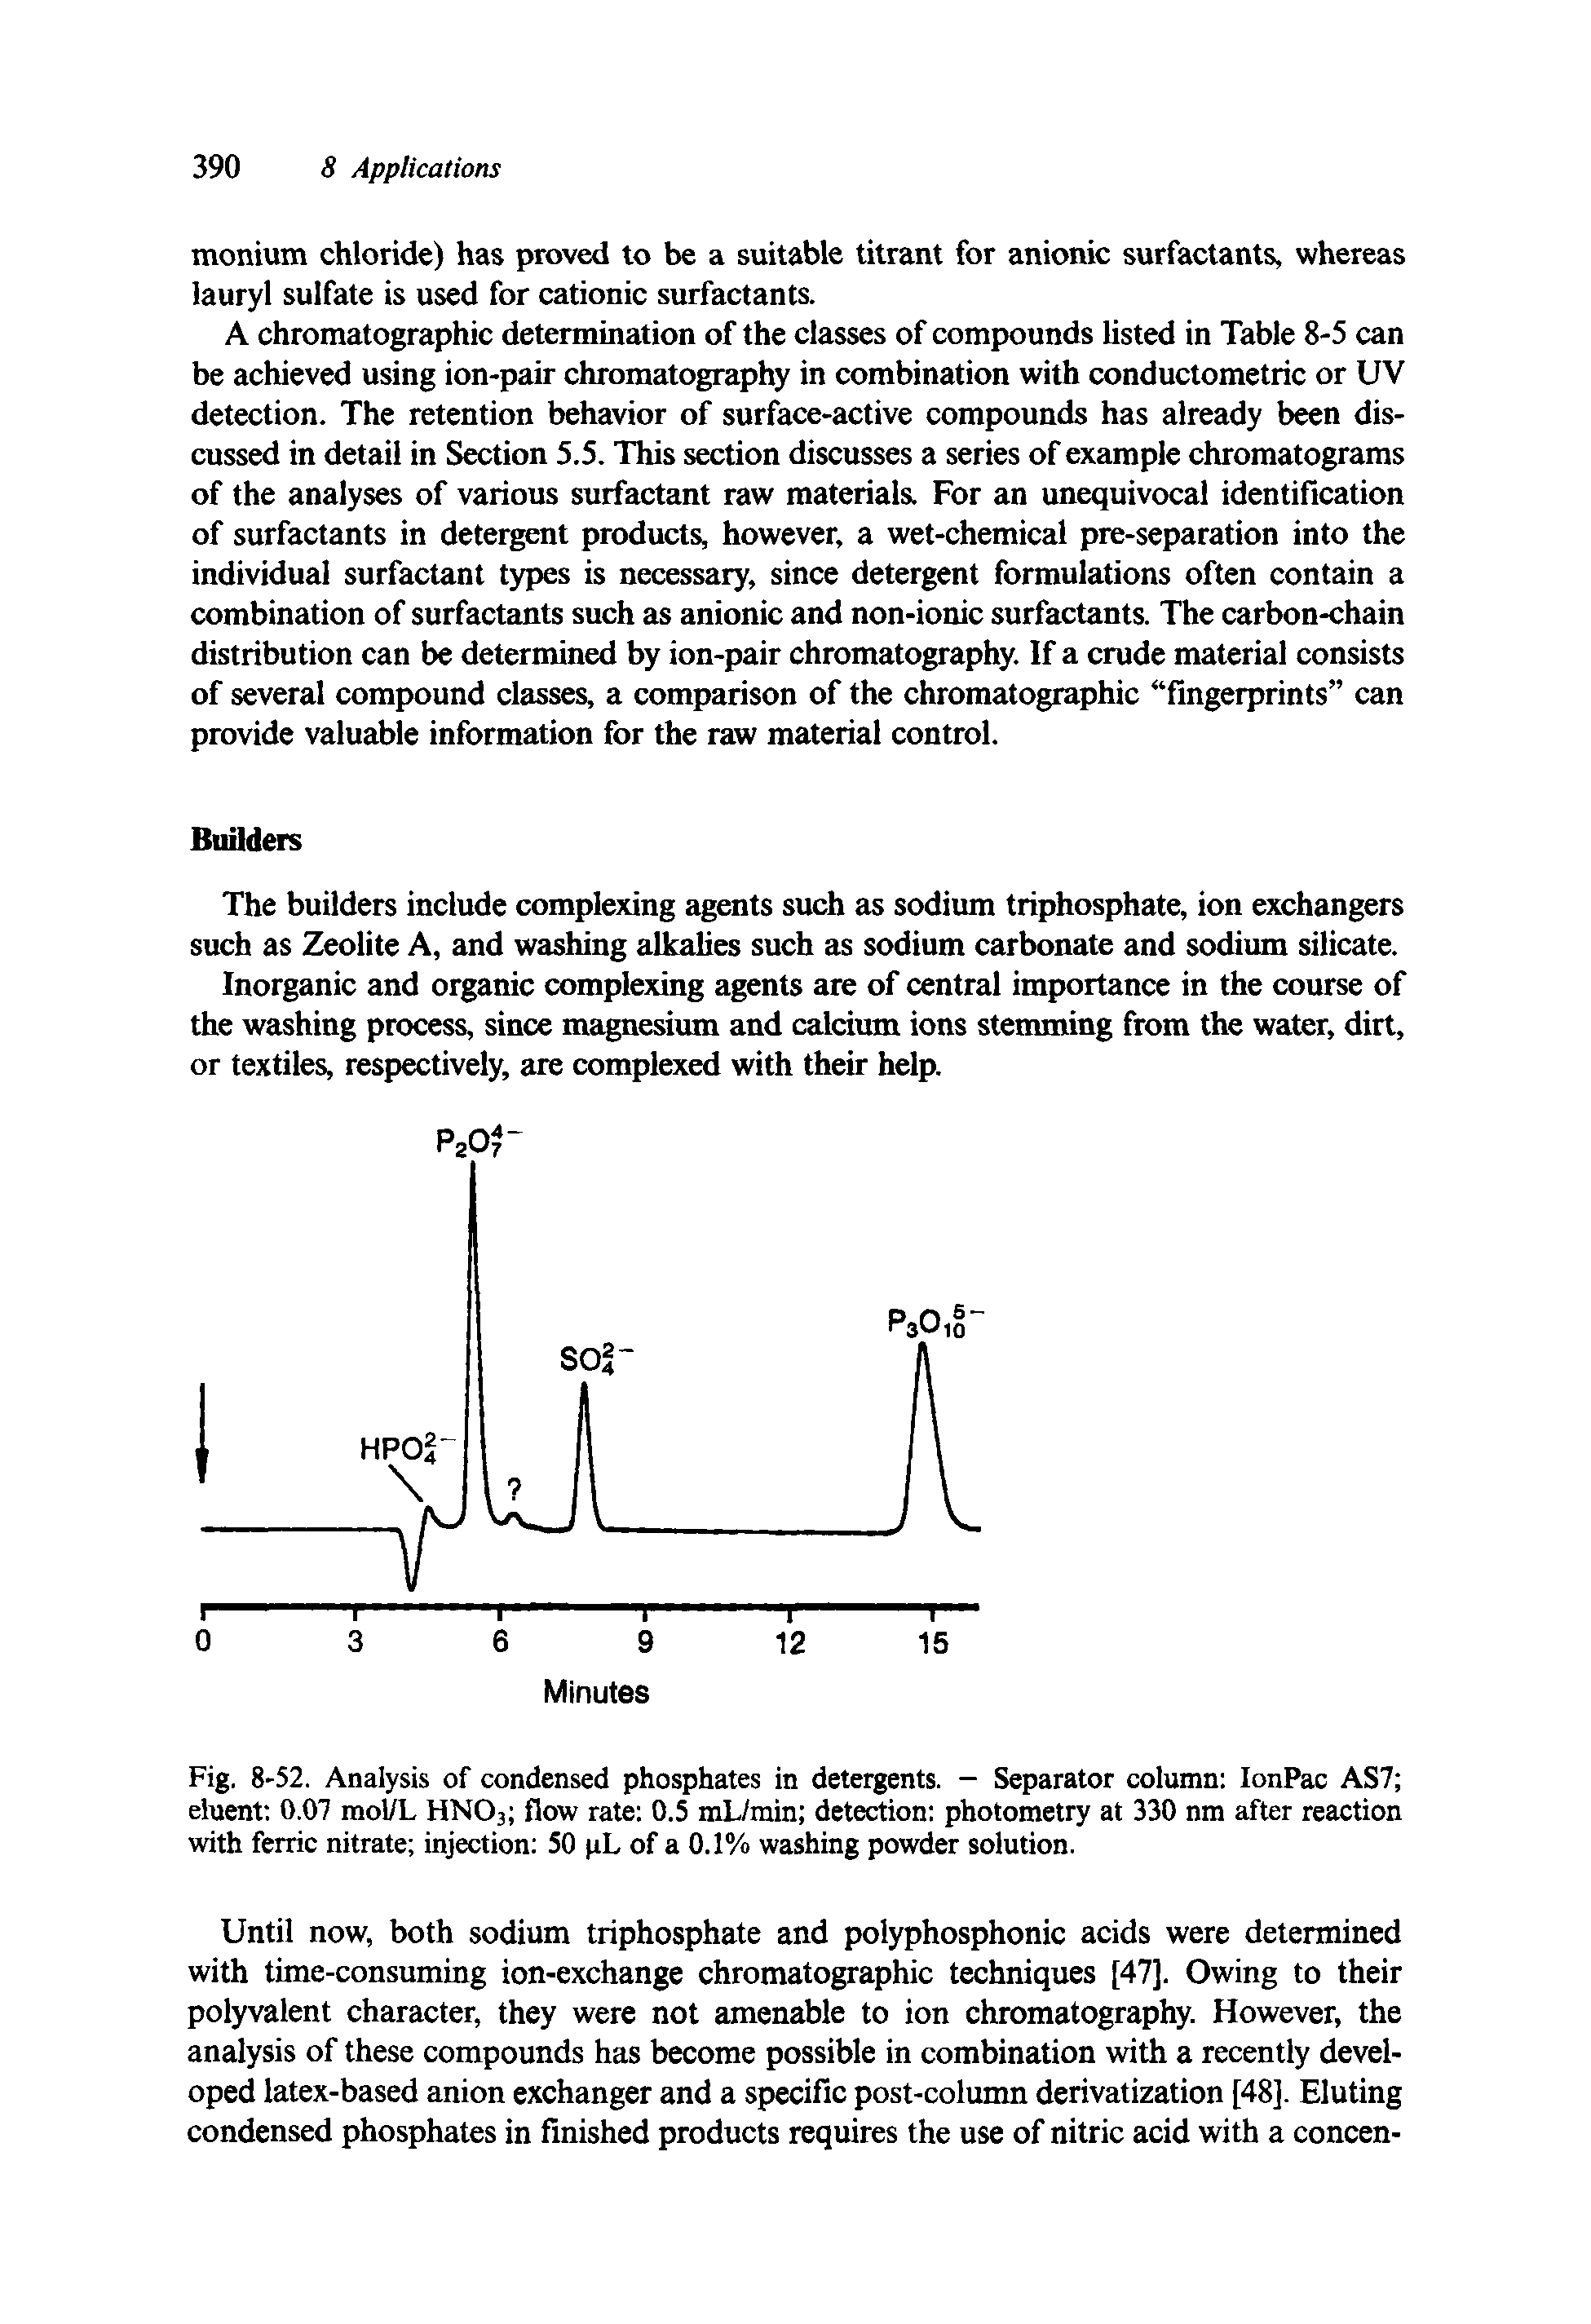 Fig. 8-52. Analysis of condensed phosphates in detergents. - Separator column IonPac AS7 eluent 0.07 mol/L HN03 flow rate 0.5 mL/min detection photometry at 330 nm after reaction with ferric nitrate injection 50 pL of a 0.1% washing powder solution.